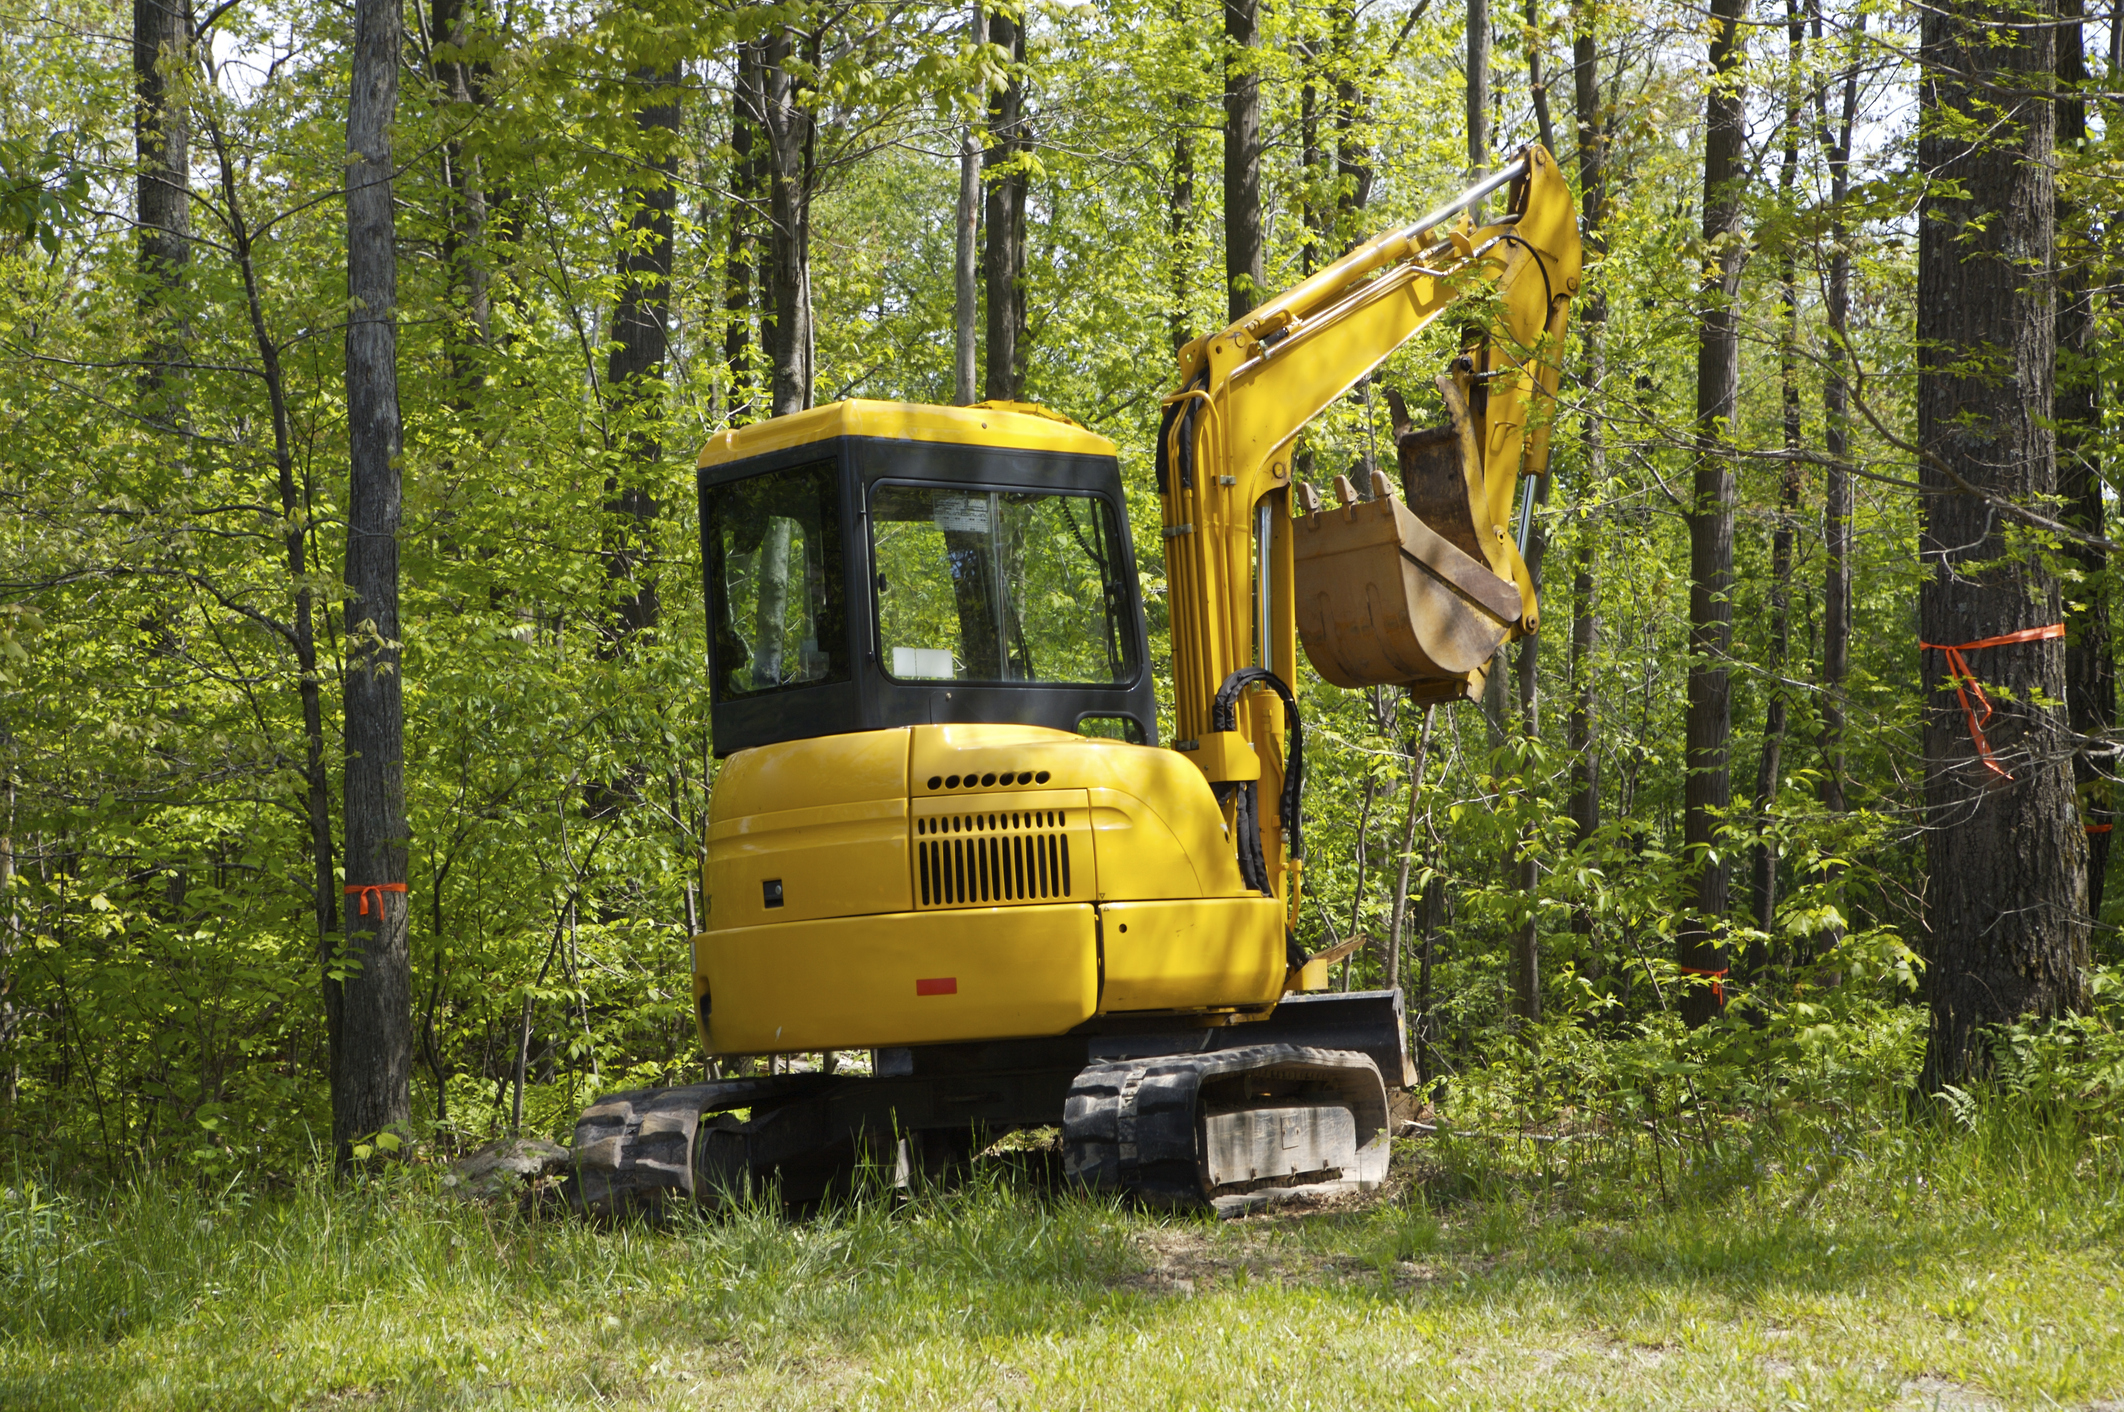 Prevent Overheating with Best Practices for Mini Excavator